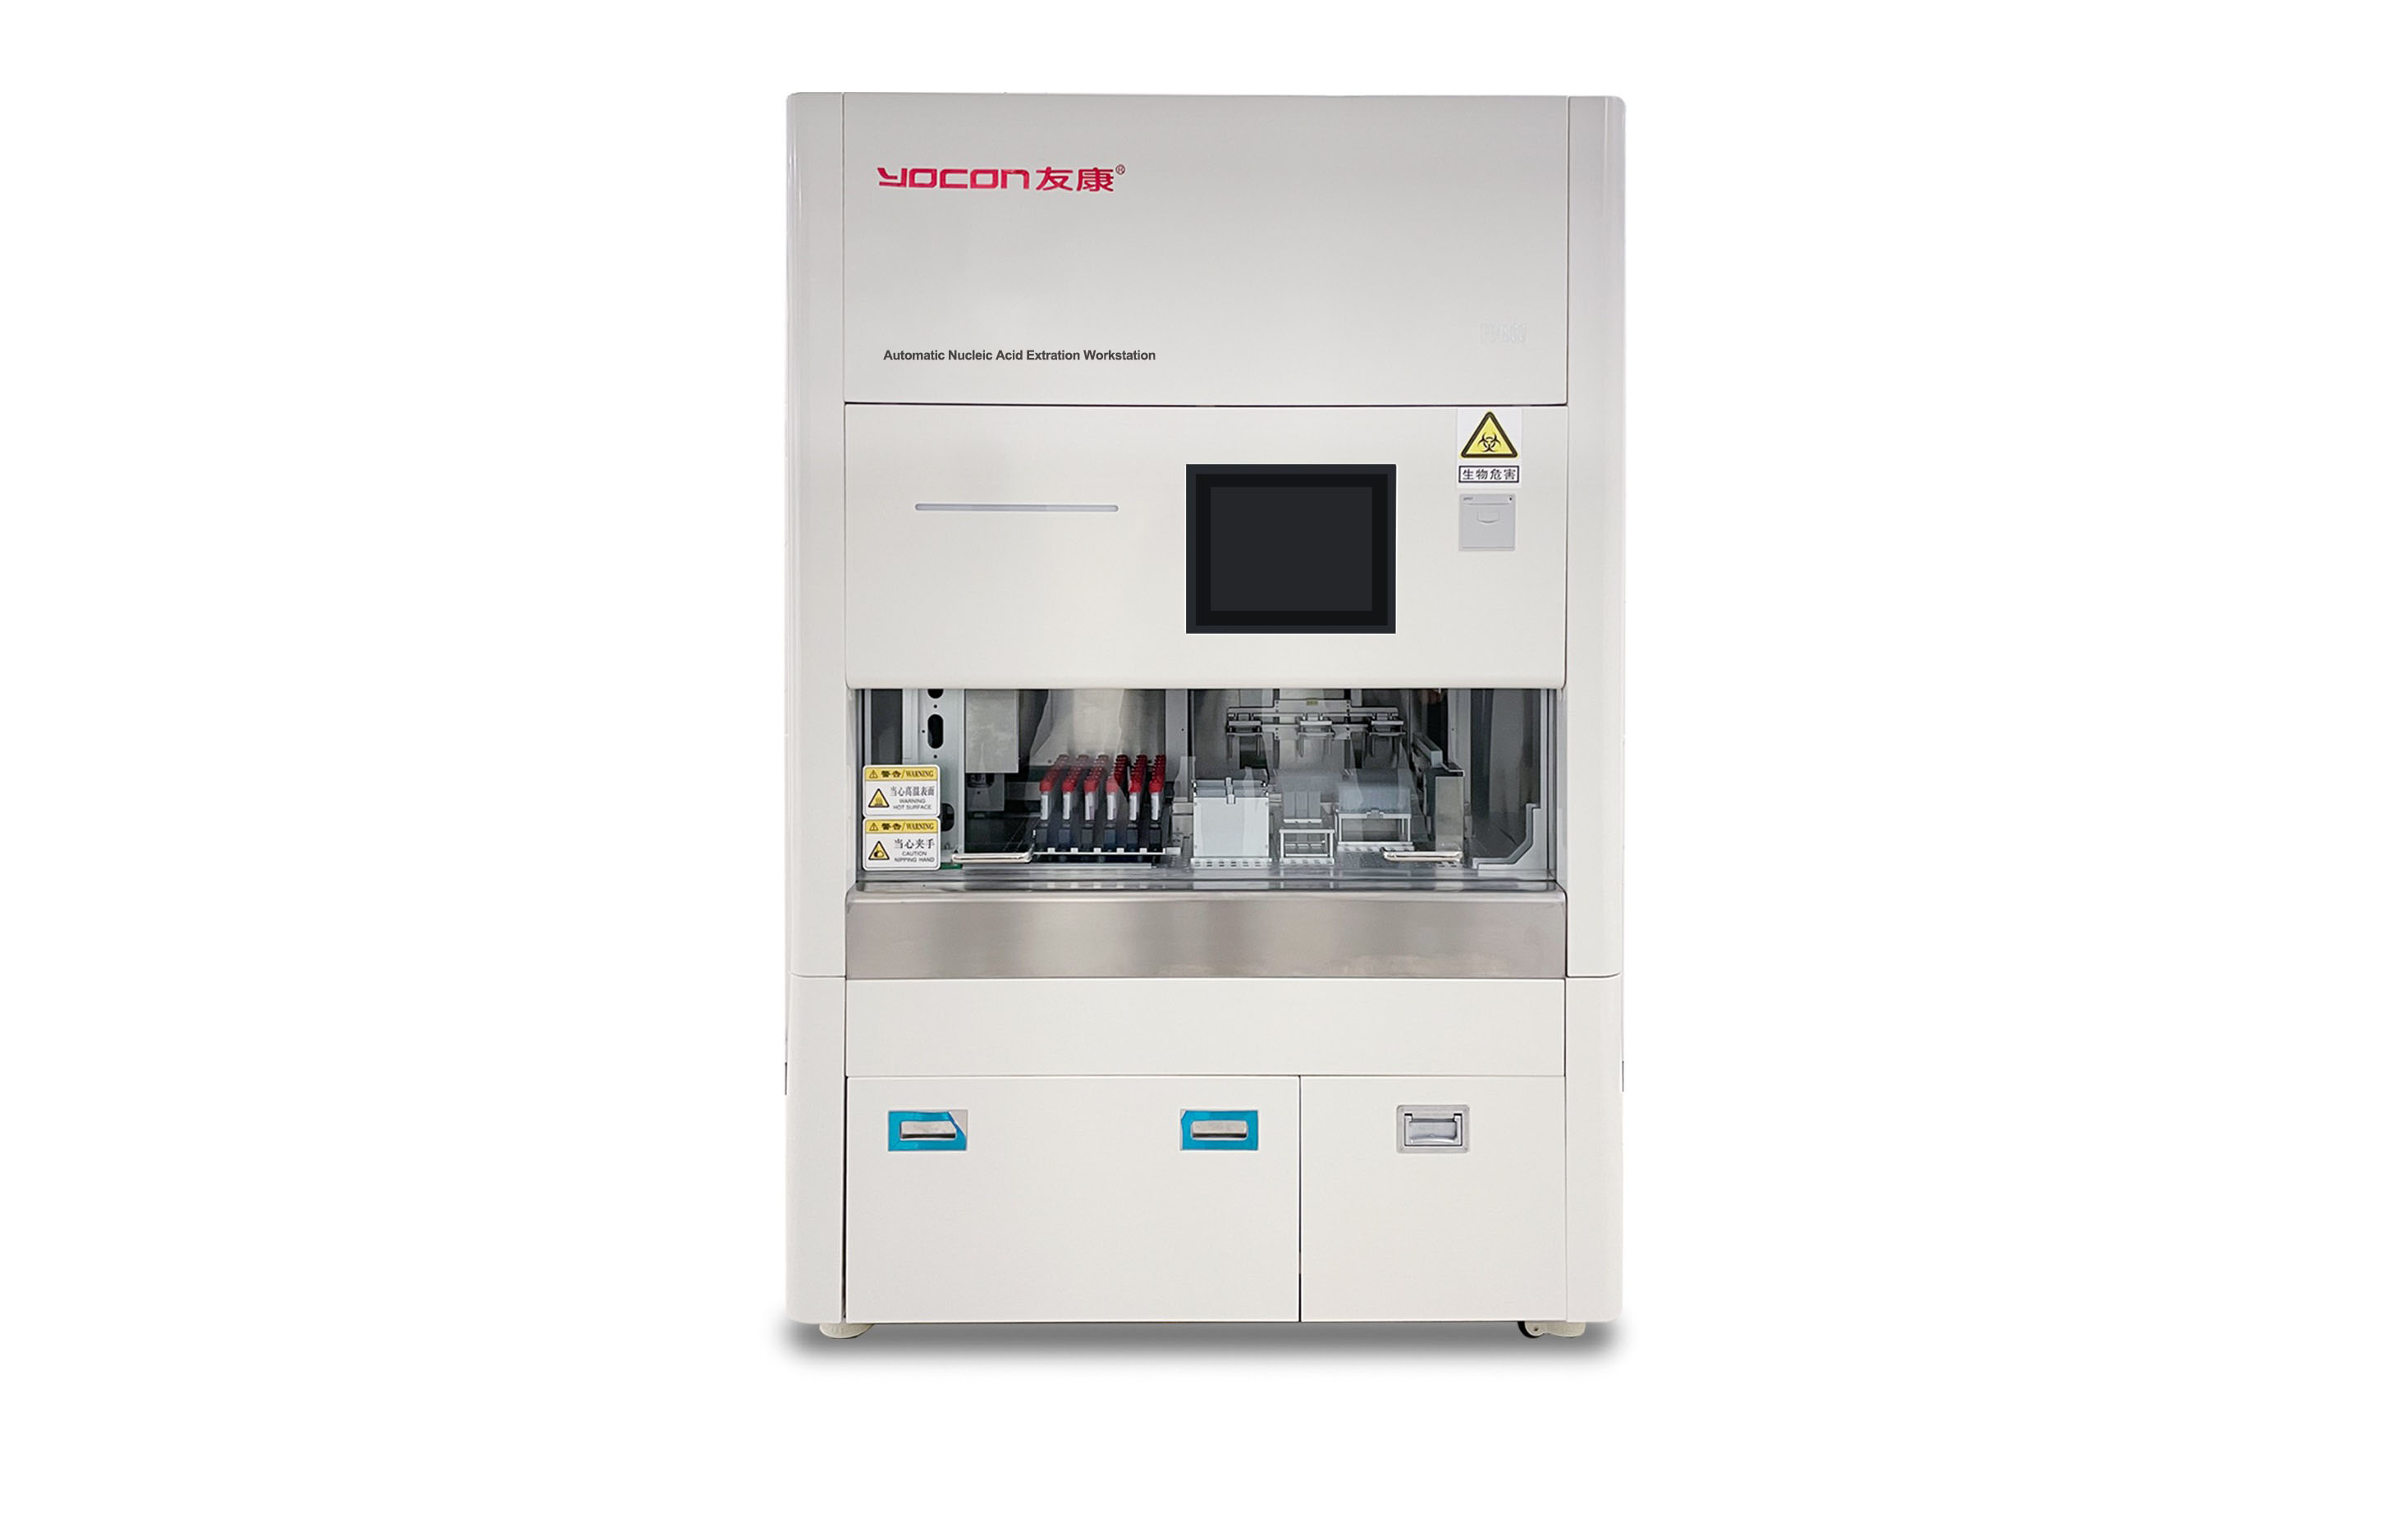 FE4800 Automatic Sample Processing and Nucleic Acid Isolation Workstation